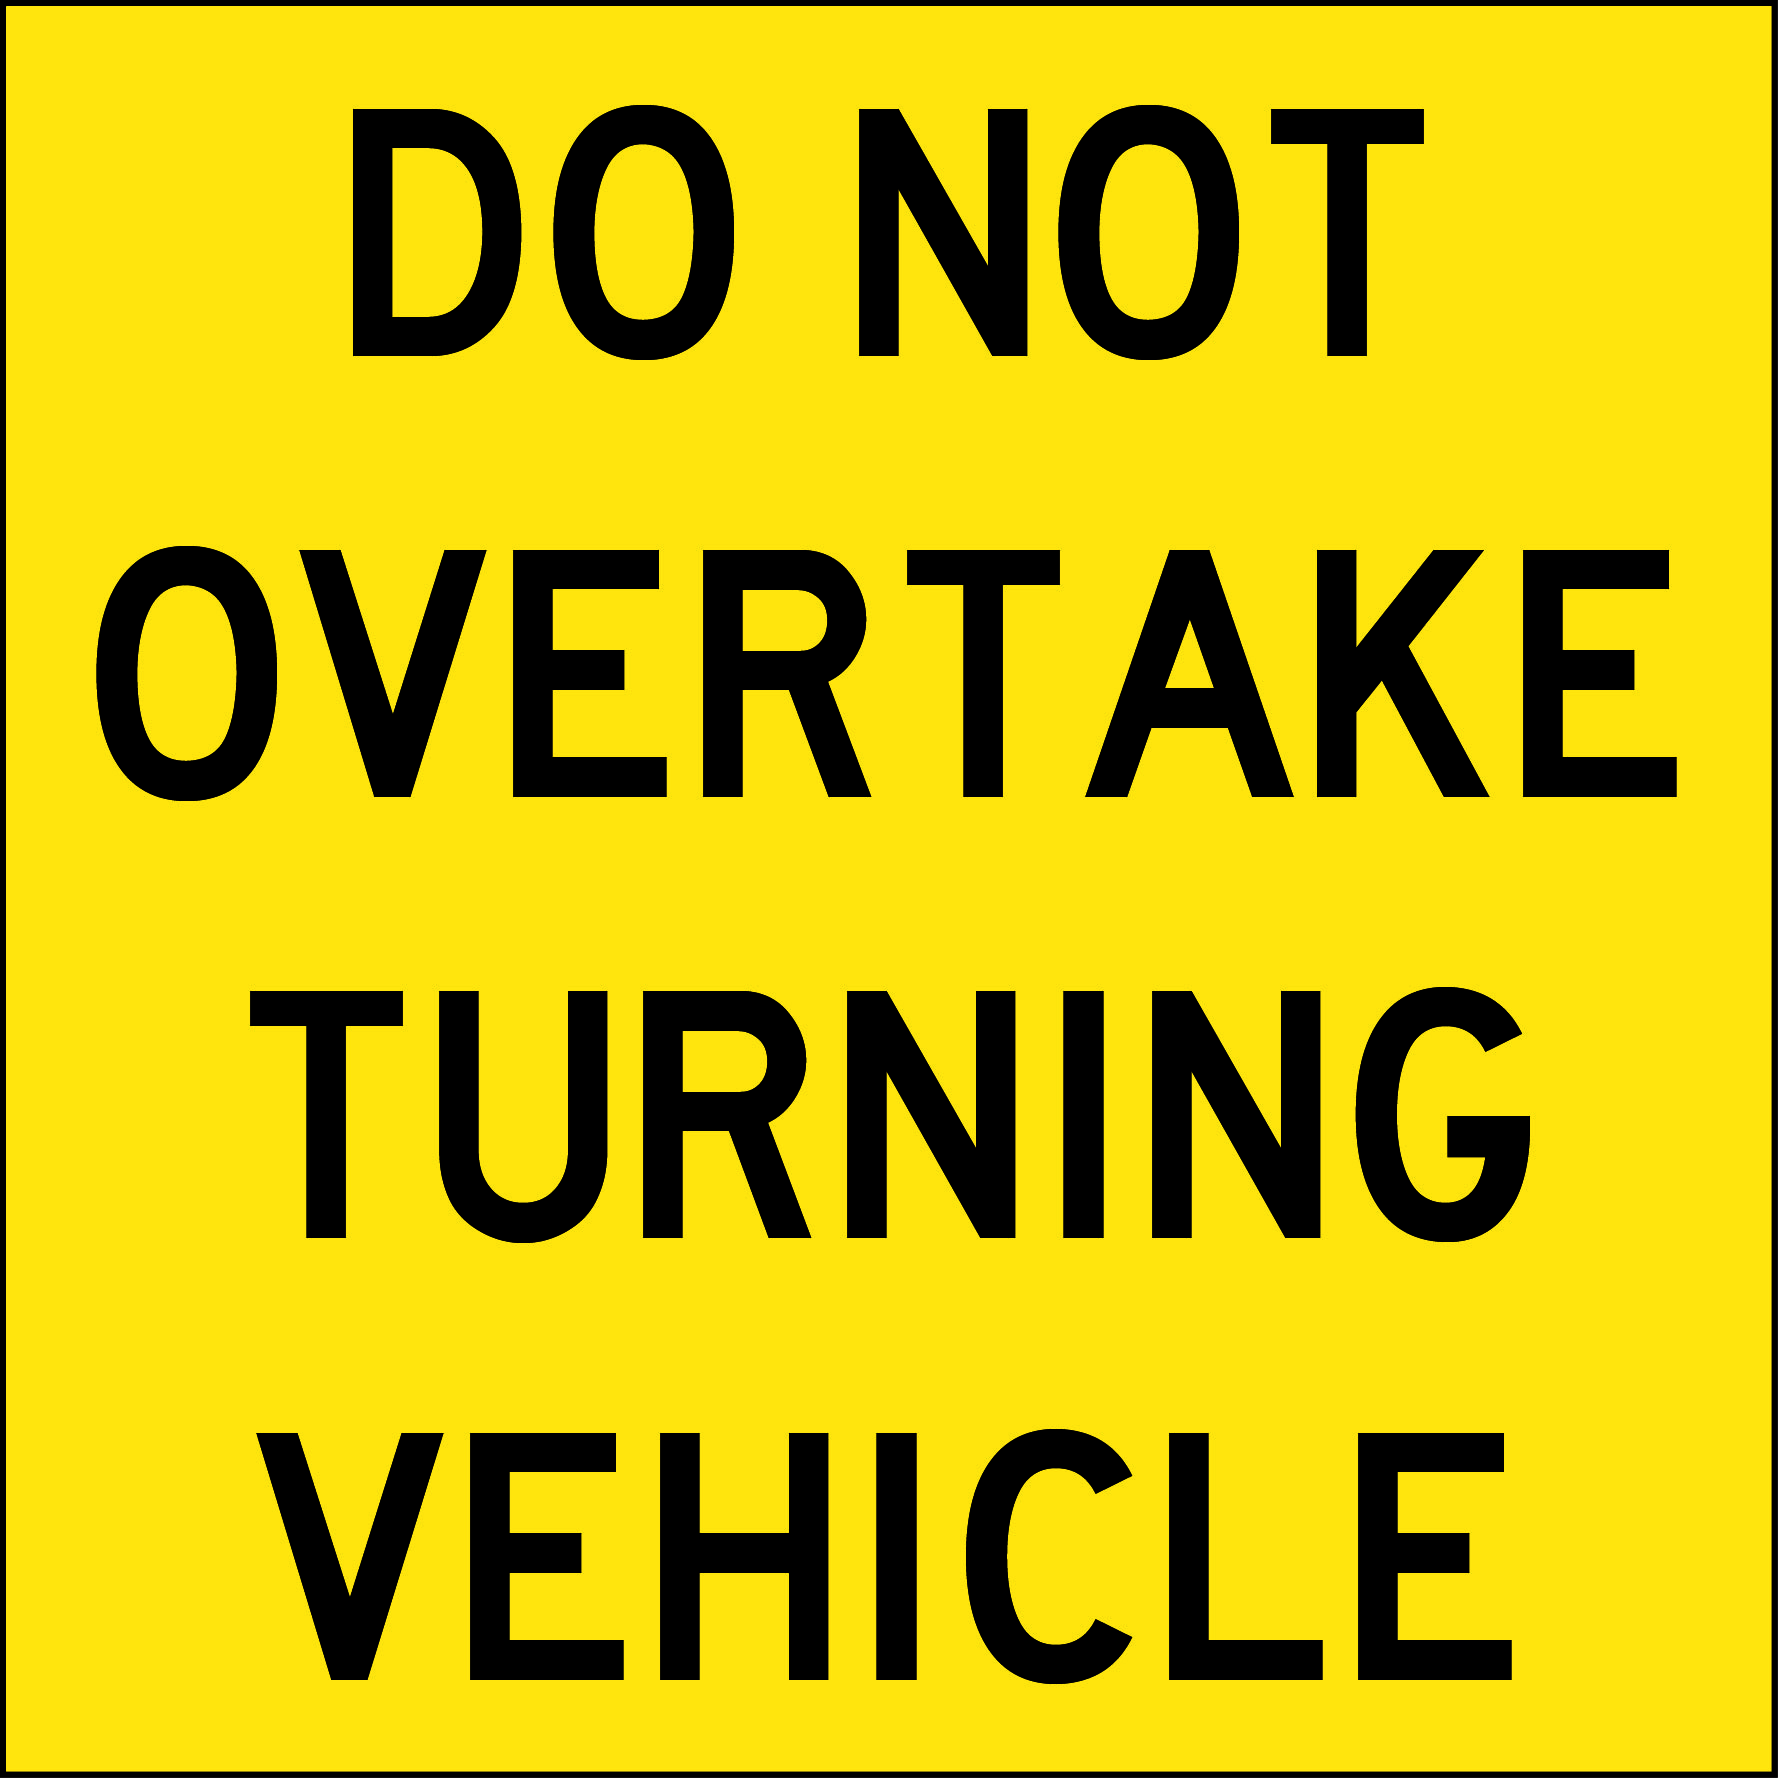 SIGN 300 X 300 - CL1 REFLECTIVE METAL DO NOT OVERTAKE TURNING VEHICLE SQ